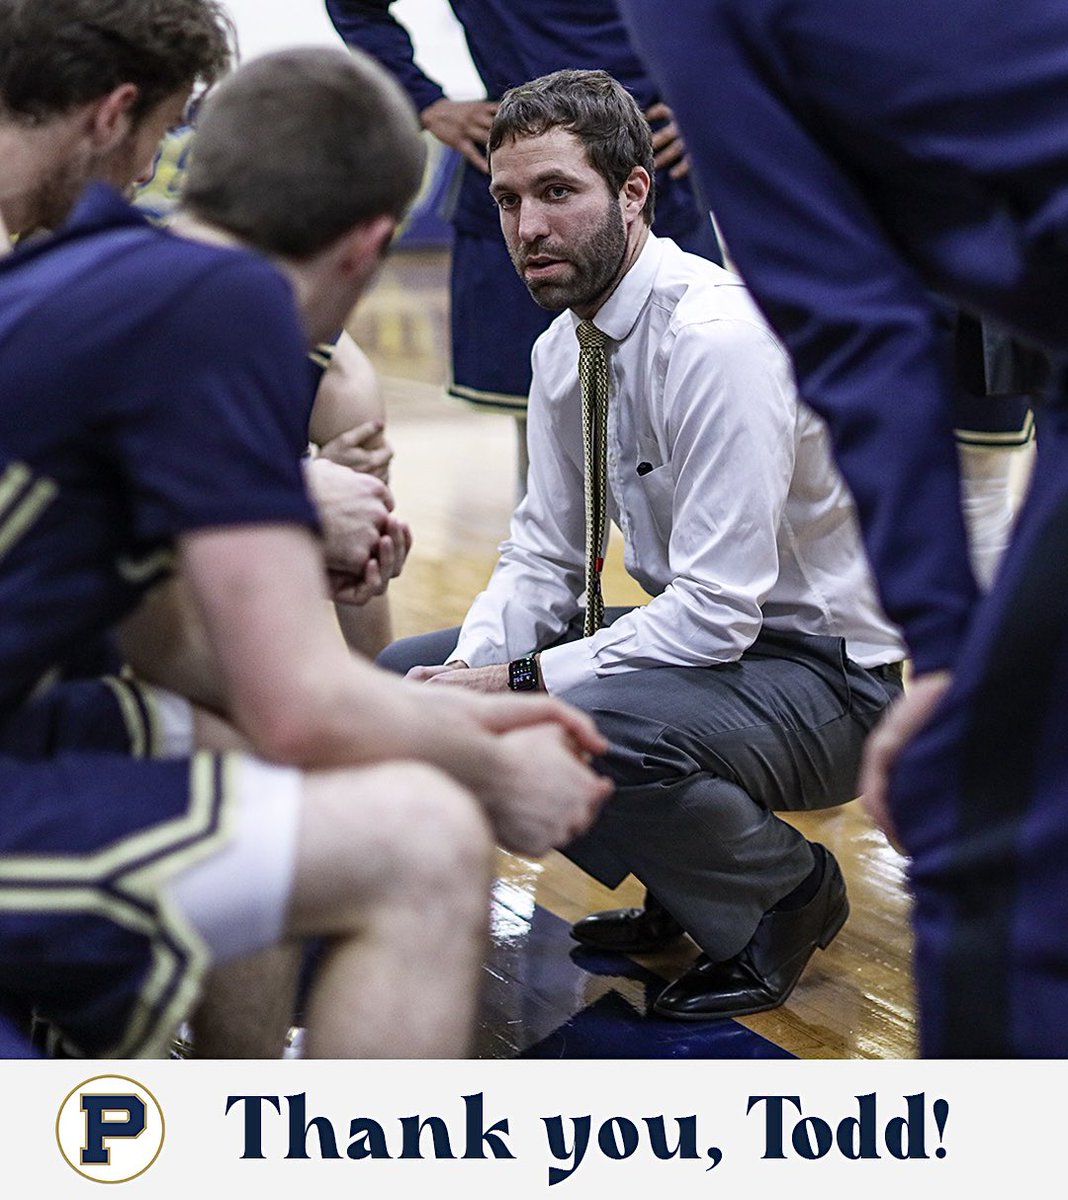 Todd Zimmerman is stepping down after eight years as head men’s basketball coach, but he will stay on to help coach both basketball and tennis. Todd led his teams to three double digit win seasons, including a program record 18 wins in 22-23. Read more: bit.ly/3K3s2qY